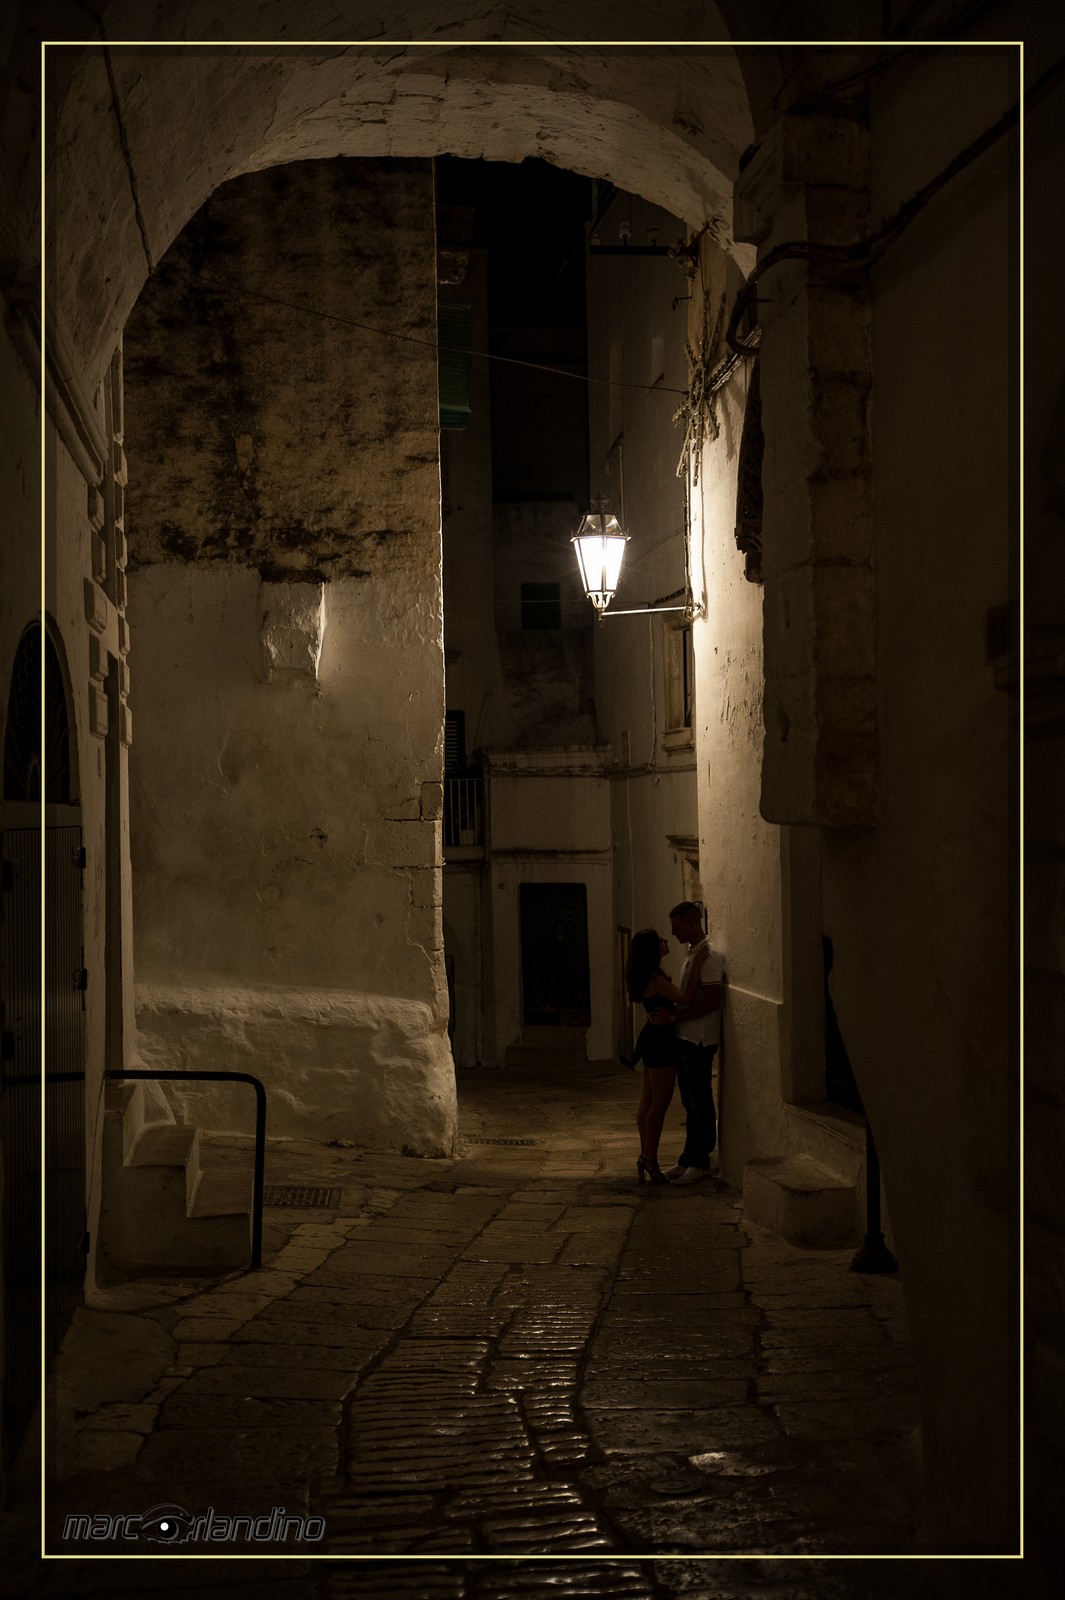 Look into the eyes of Ostuni's alleys...